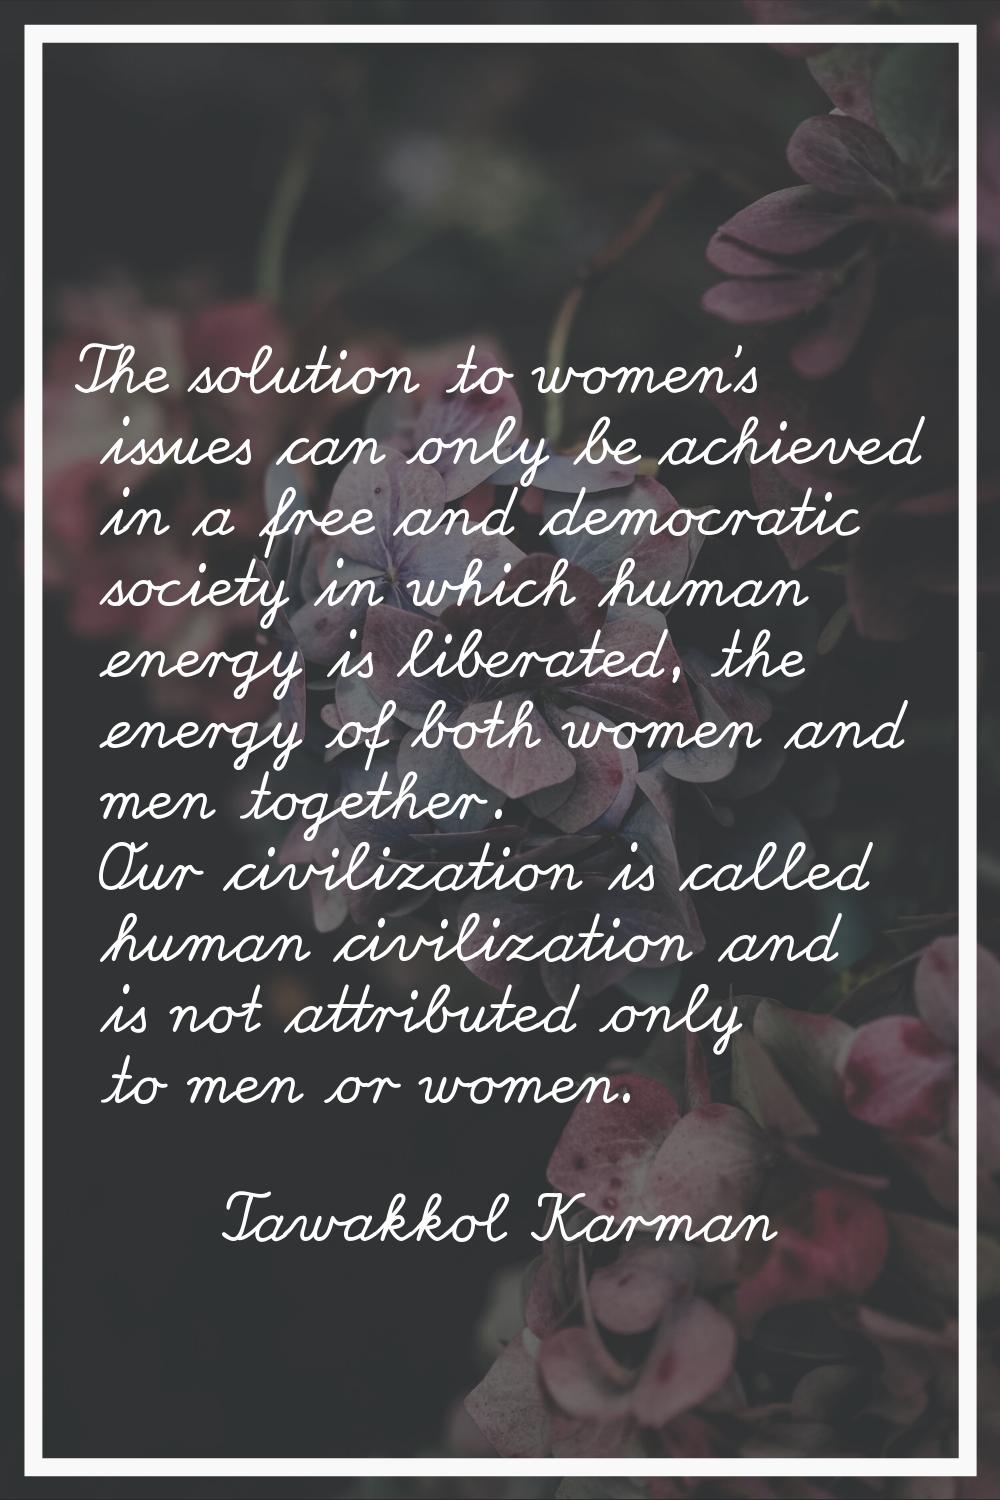 The solution to women's issues can only be achieved in a free and democratic society in which human